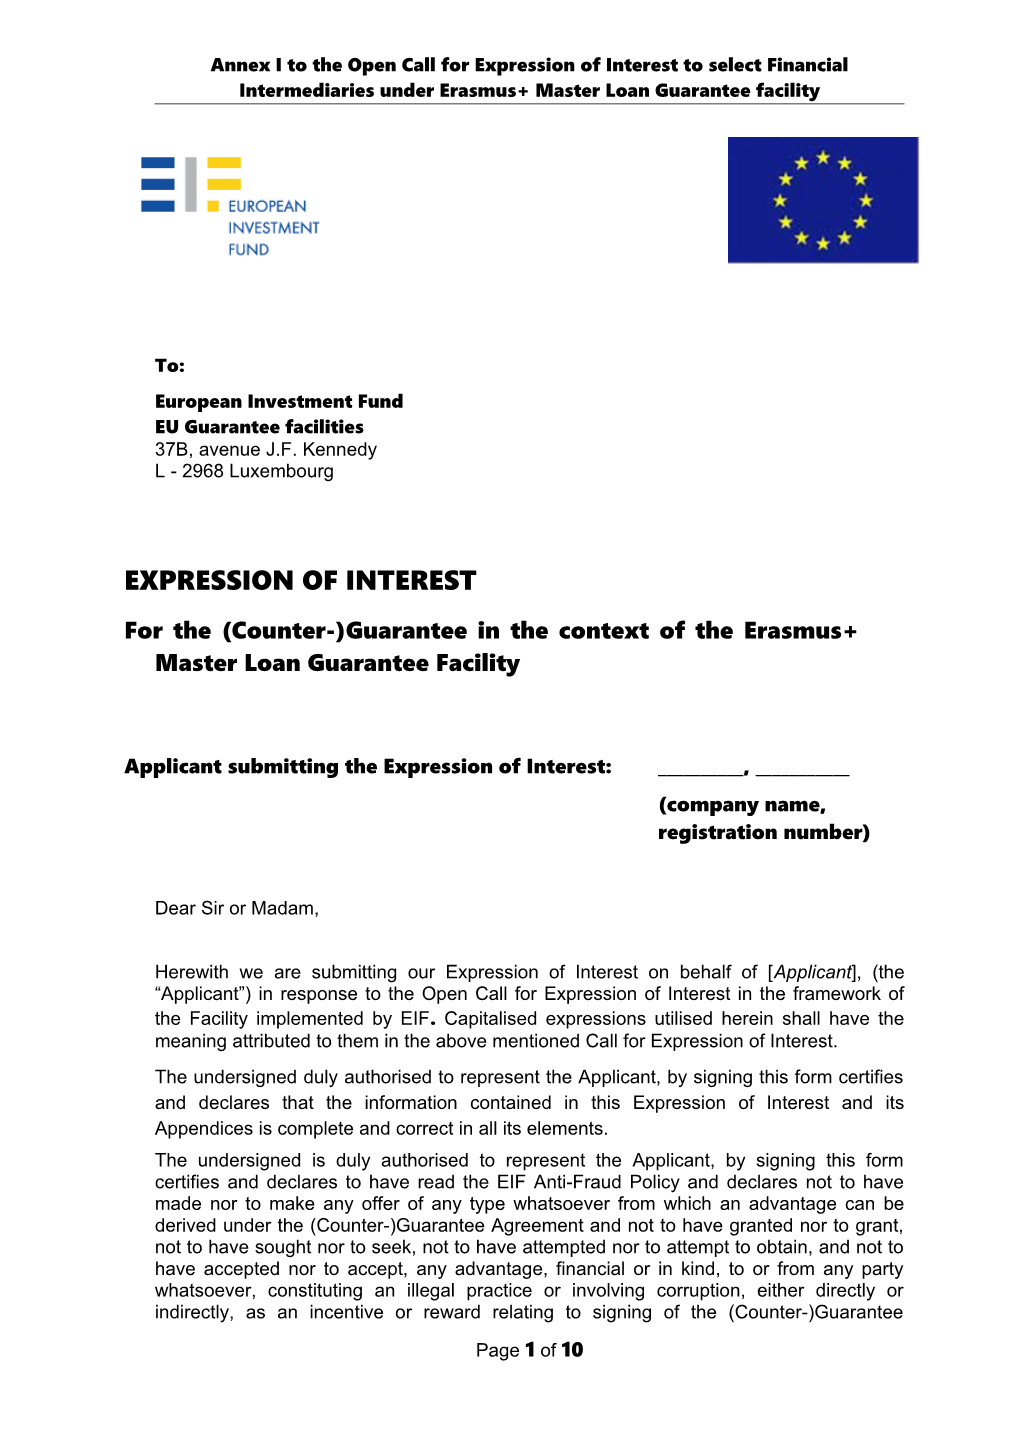 Annex I to the Open Call for Expression of Interestto Select Financial Intermediaries